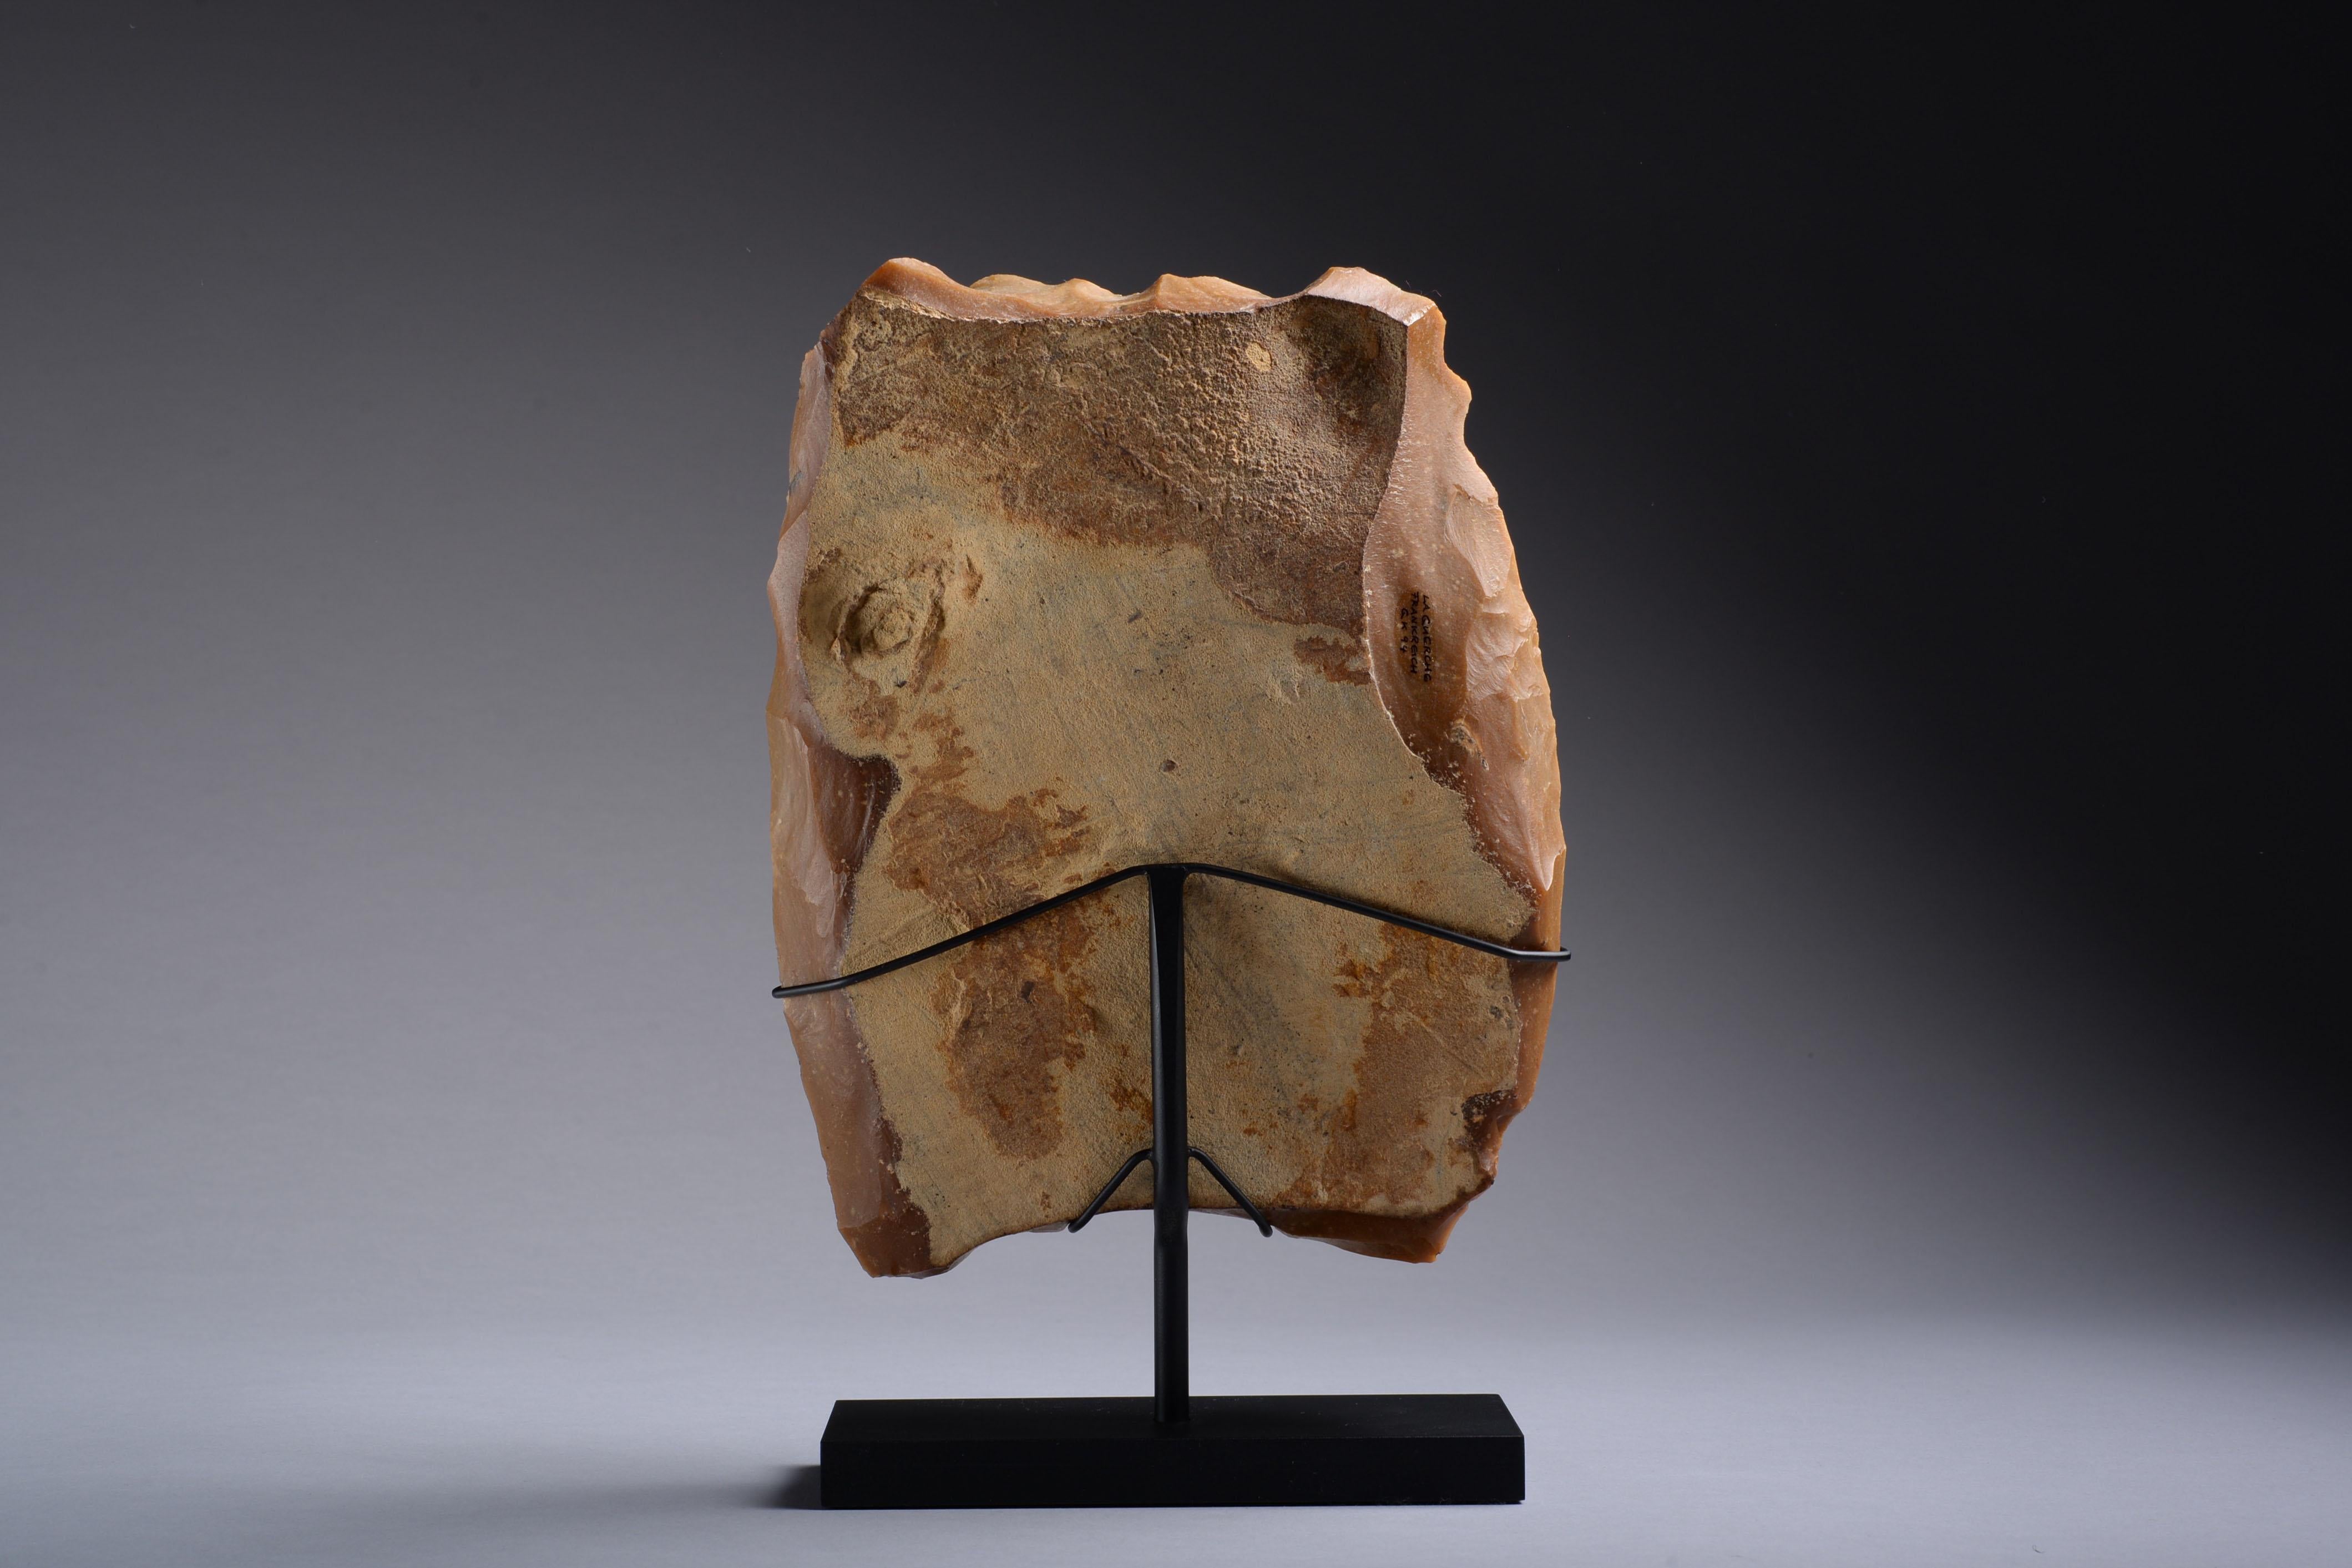 18th Century and Earlier Large Neolithic Flint Core Tool, 8500 BC